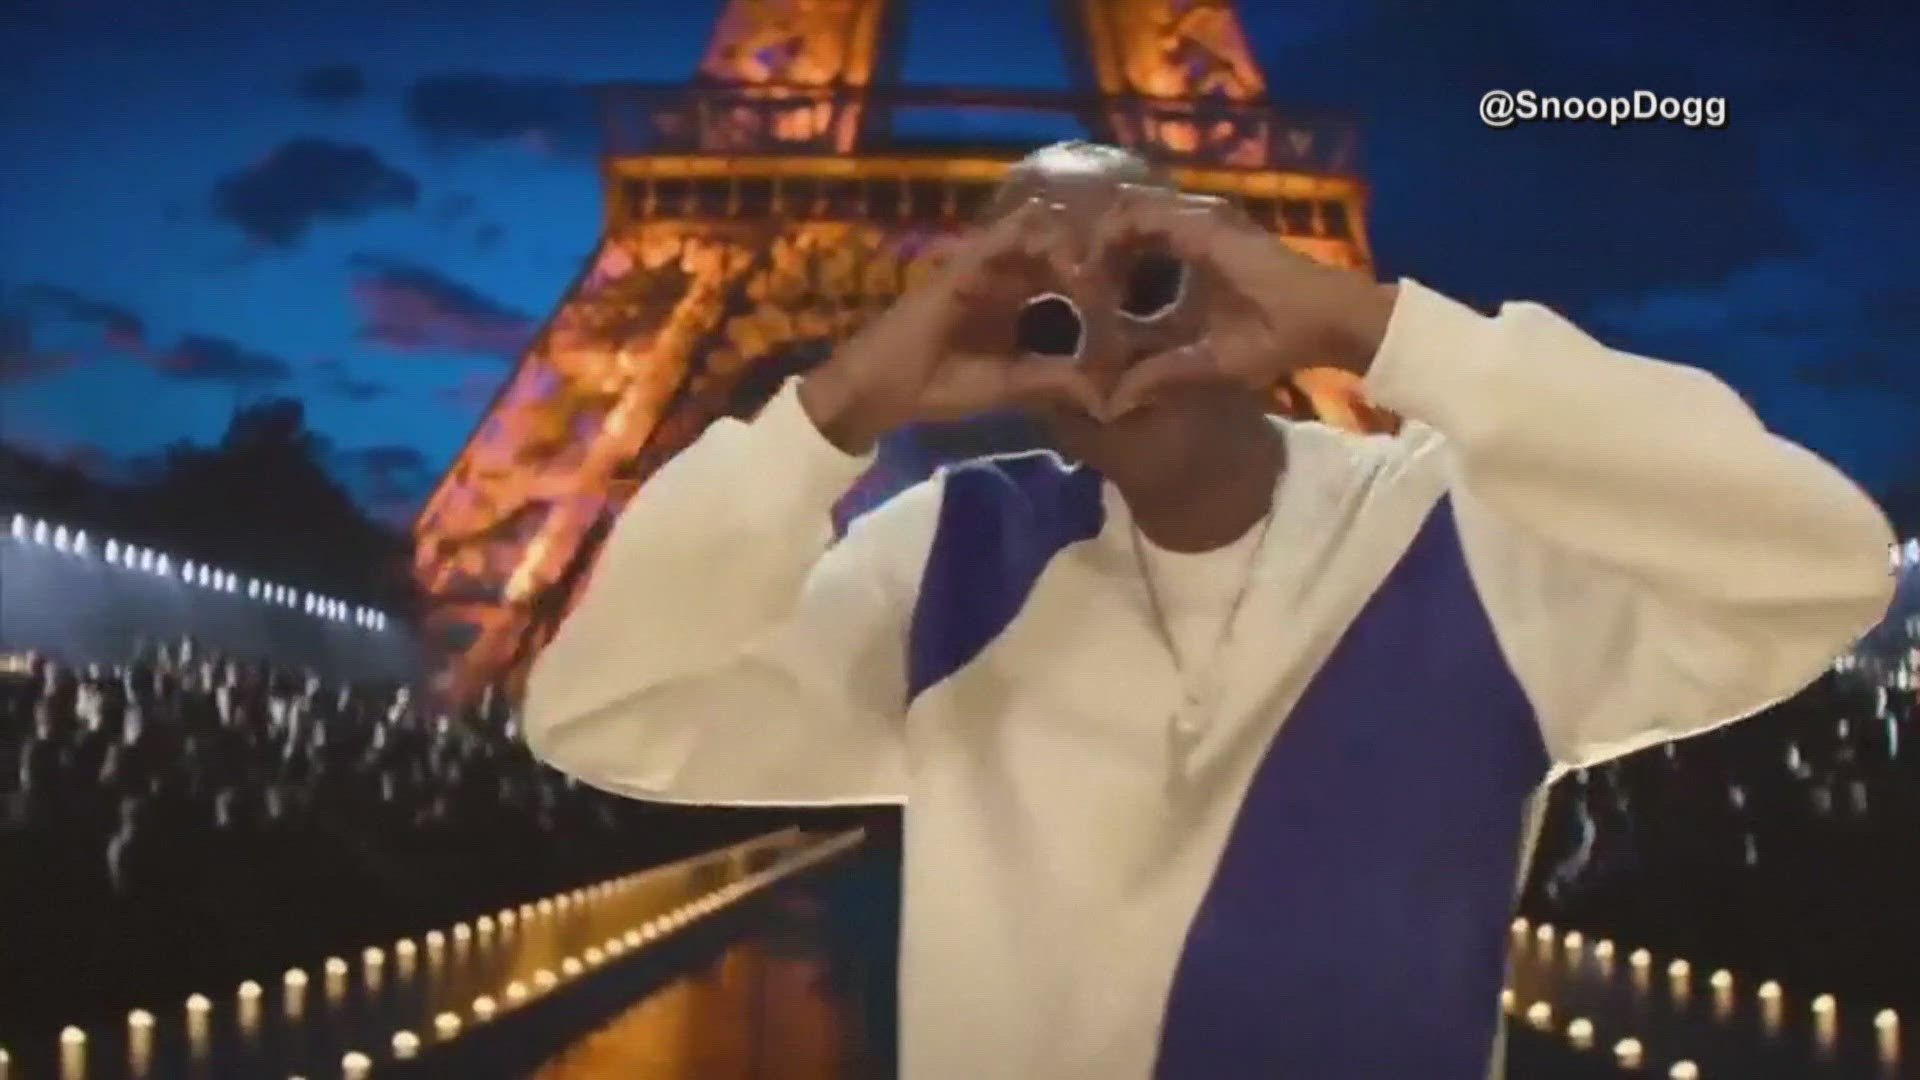 Snoop Dogg has been announced as a celebrity commentator during the 2024 Paris Olympics. In addition to sports comments, Snoop will explore iconic landmarks.